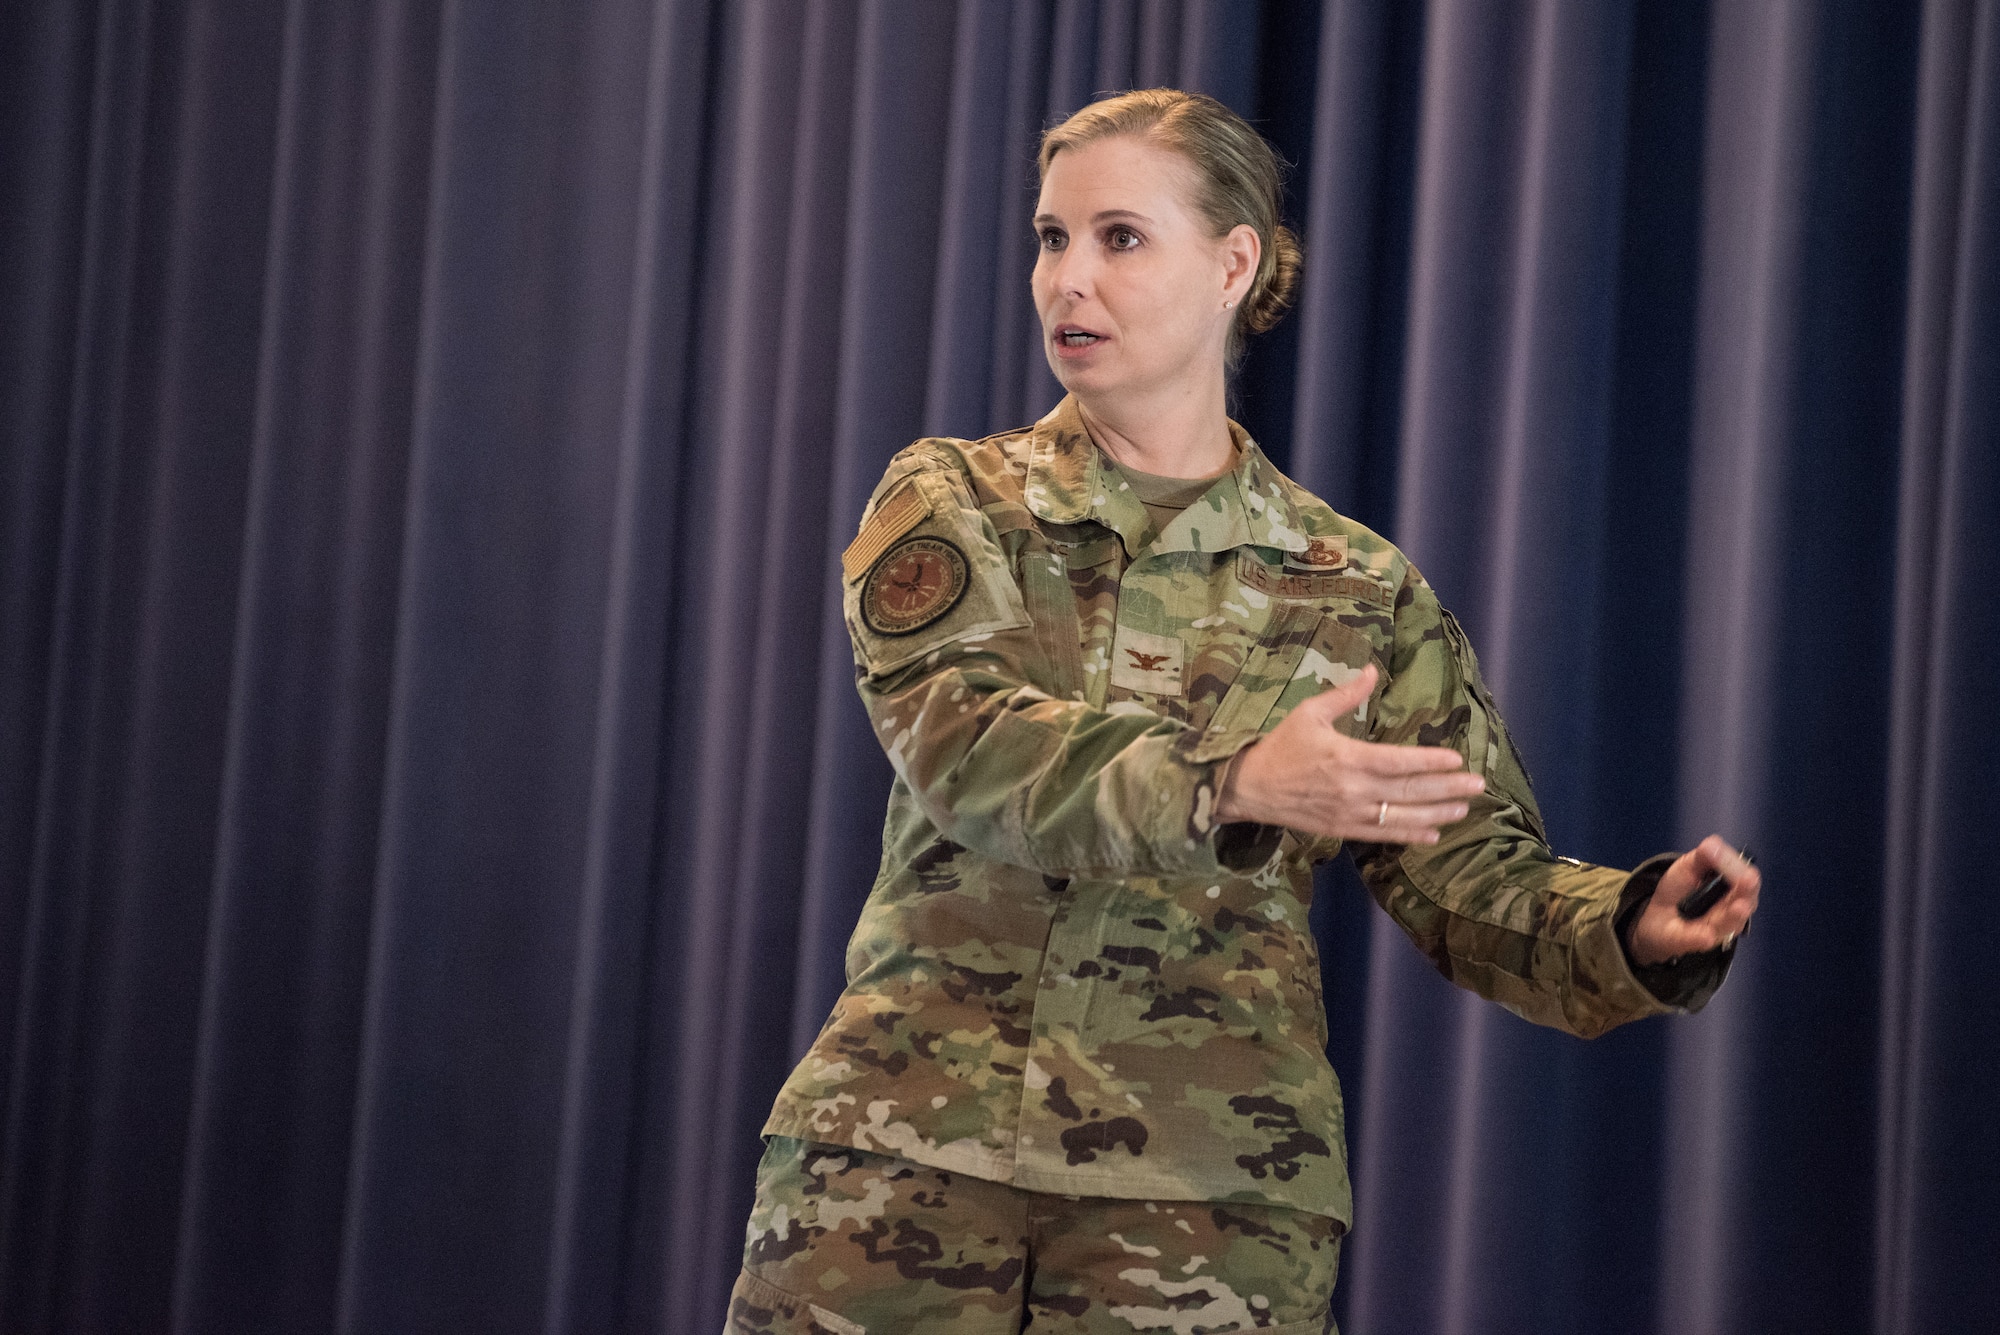 Col. Kelly Sams, assistant secretary of the Air Force Manpower and Reserve Affairs, senior military assistant, talks about the Line of the Air Force Promotion Category Configuration in a visit the SAF/MR made to Peterson Air Force Base, Colorado, July 9, 2019. The proposal places Line of the Air Force Specialty Codes into six new categories.